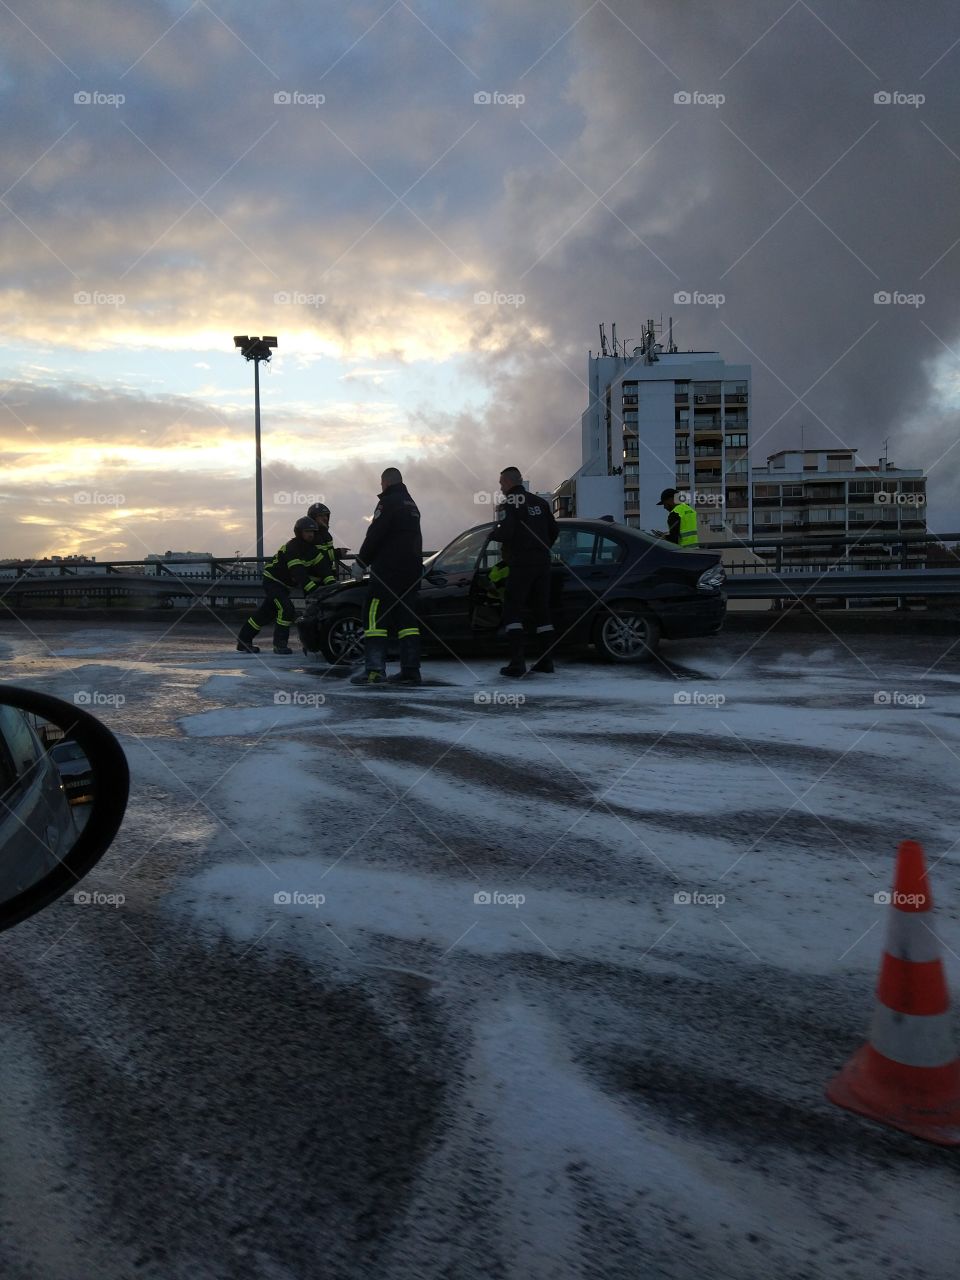 Vehicle, Accident, Road, Street, Storm